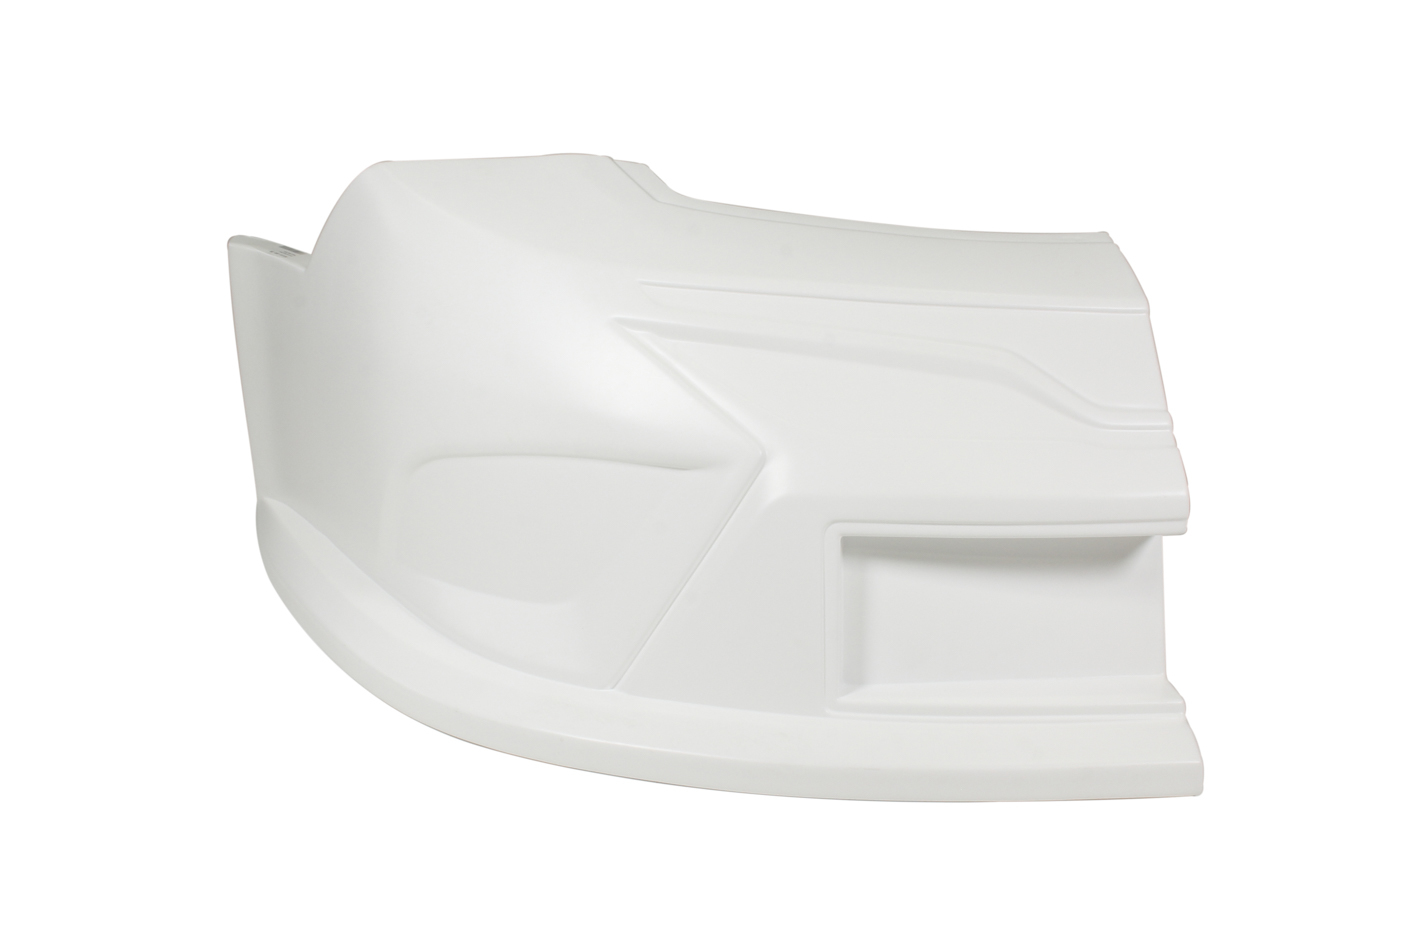 FIVESTAR 2019 LM Toyota Nose Plastic White Right P/N -11712-41051-WR